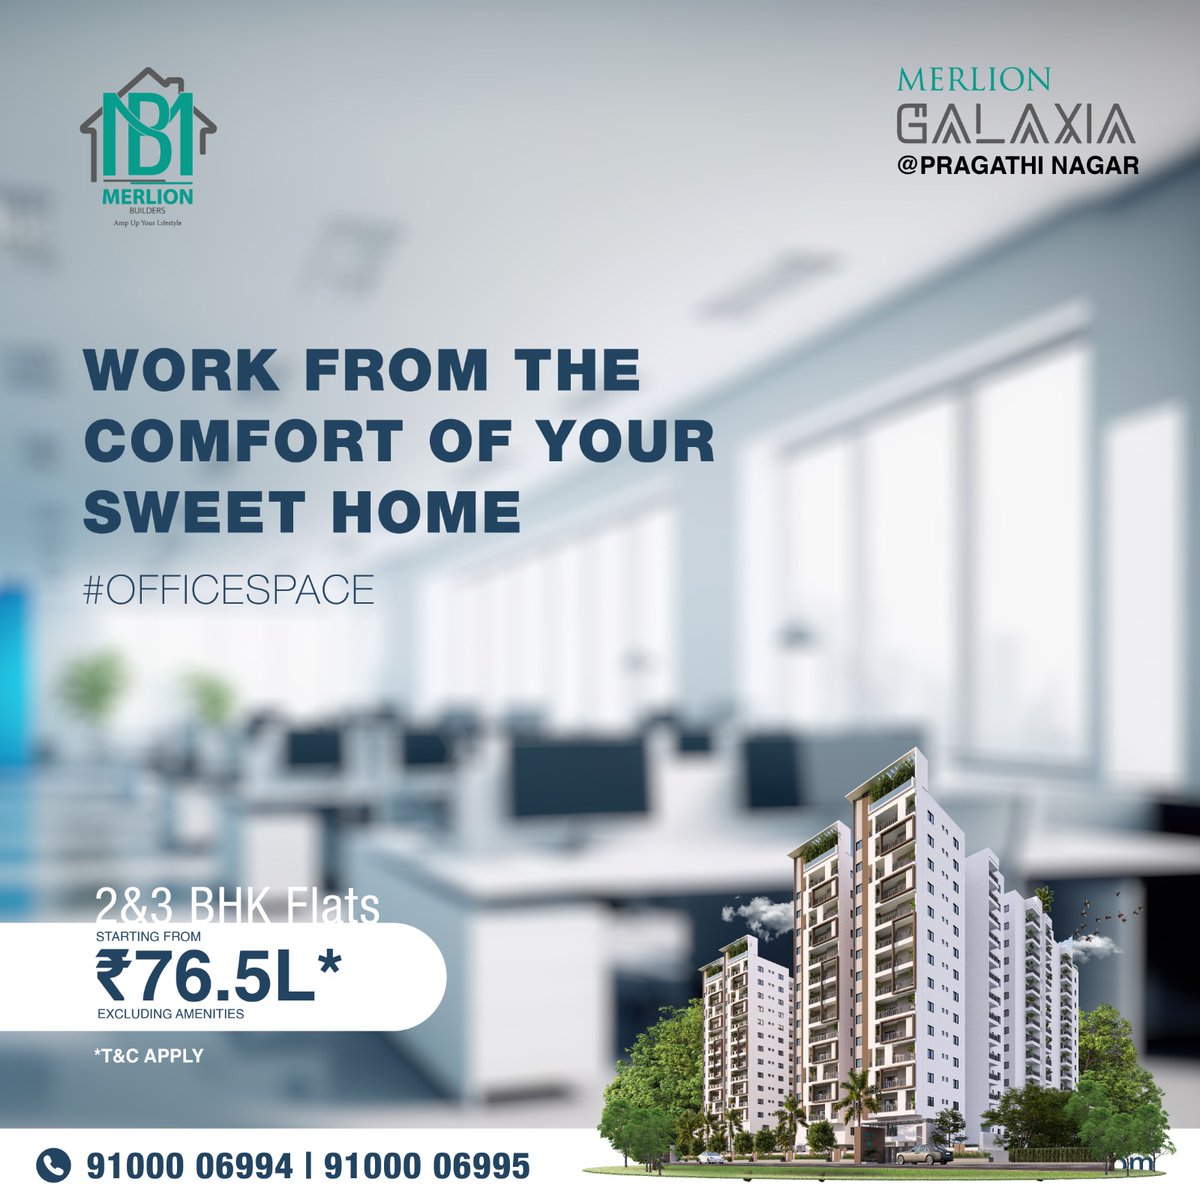 This address comes with everything your family needs to live a life of absolute comfort. For more details visit our website: merlionbuilders.com #merlionbuilders #pragathinagar #flatsforsale #apartmentsforsale #highrisebuildings #luxuryapartmentsforsale #workspace